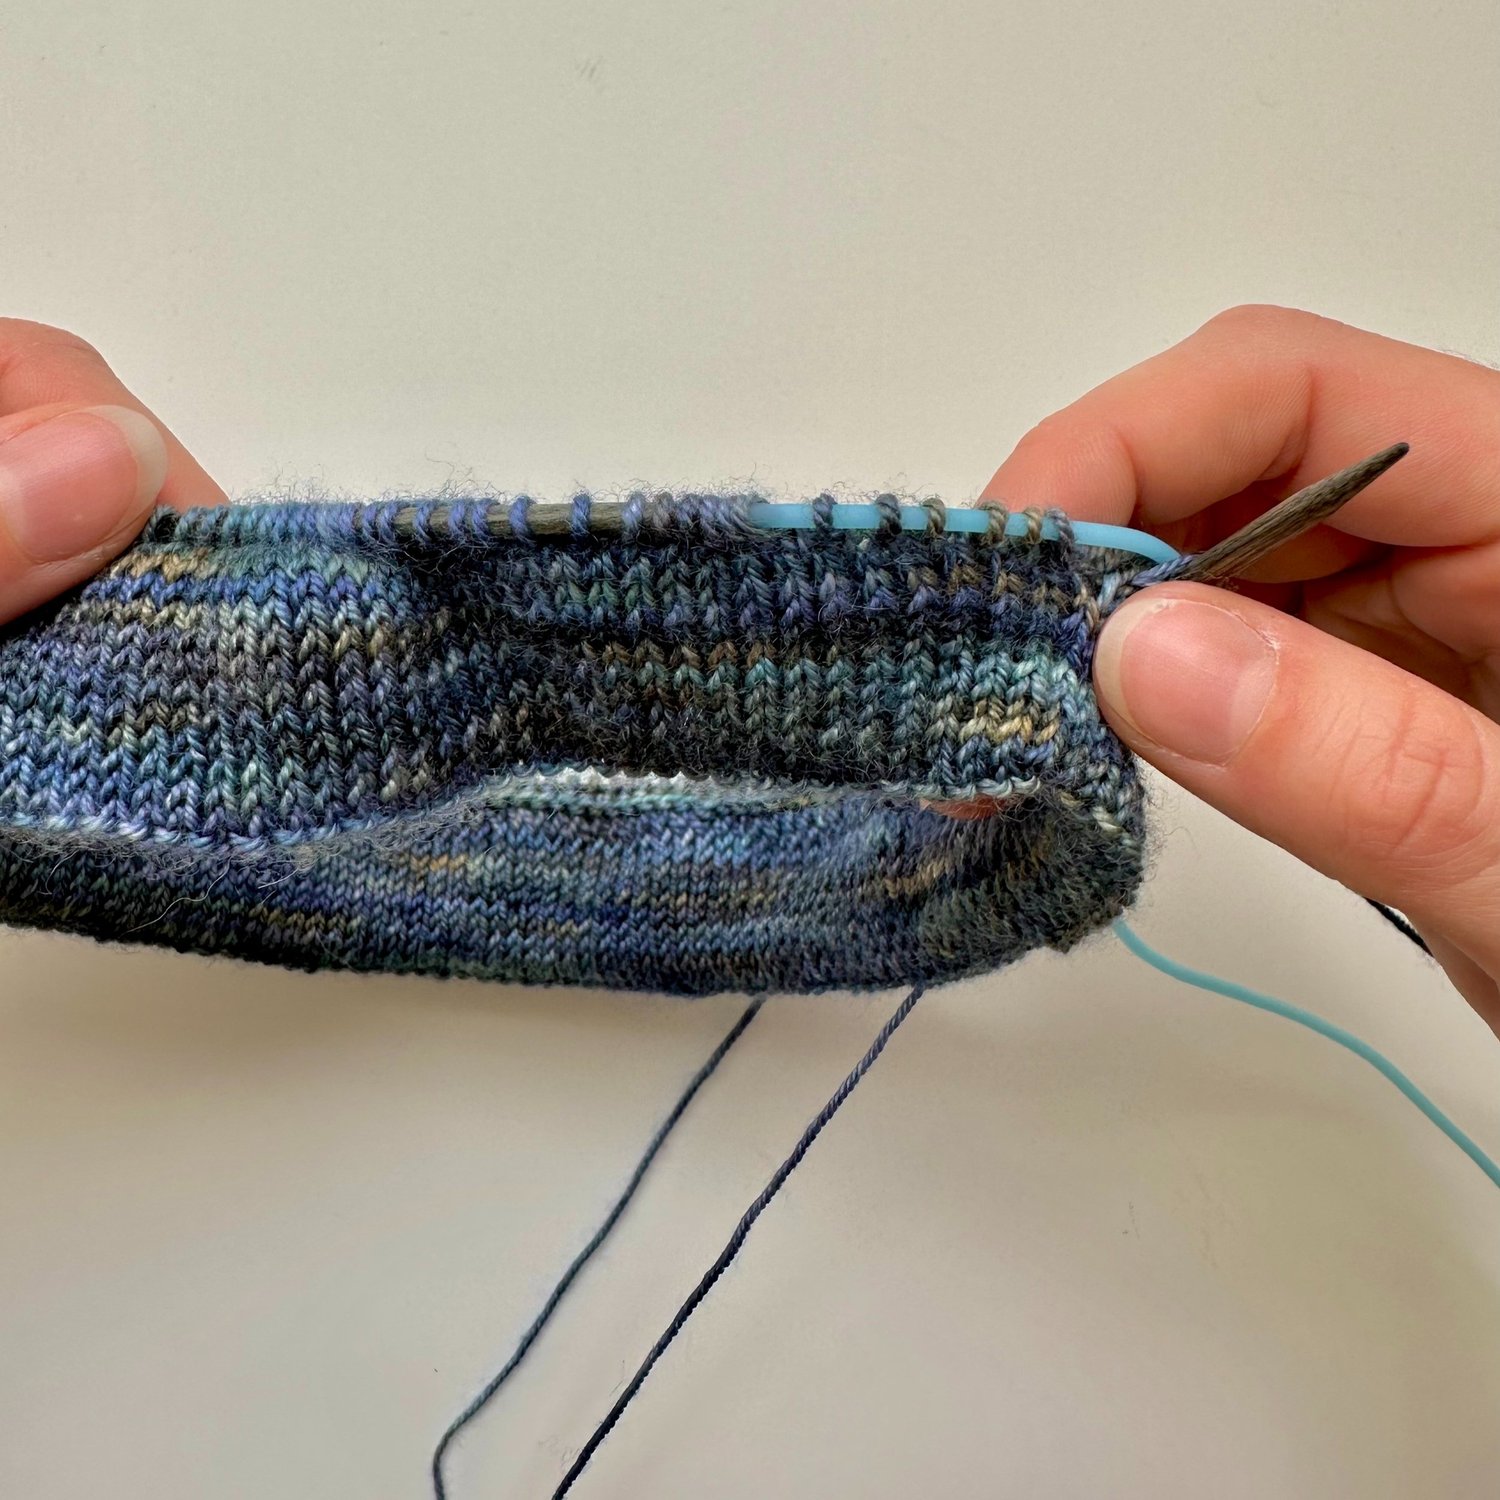 How to Knit: Using a Stitch Holder 